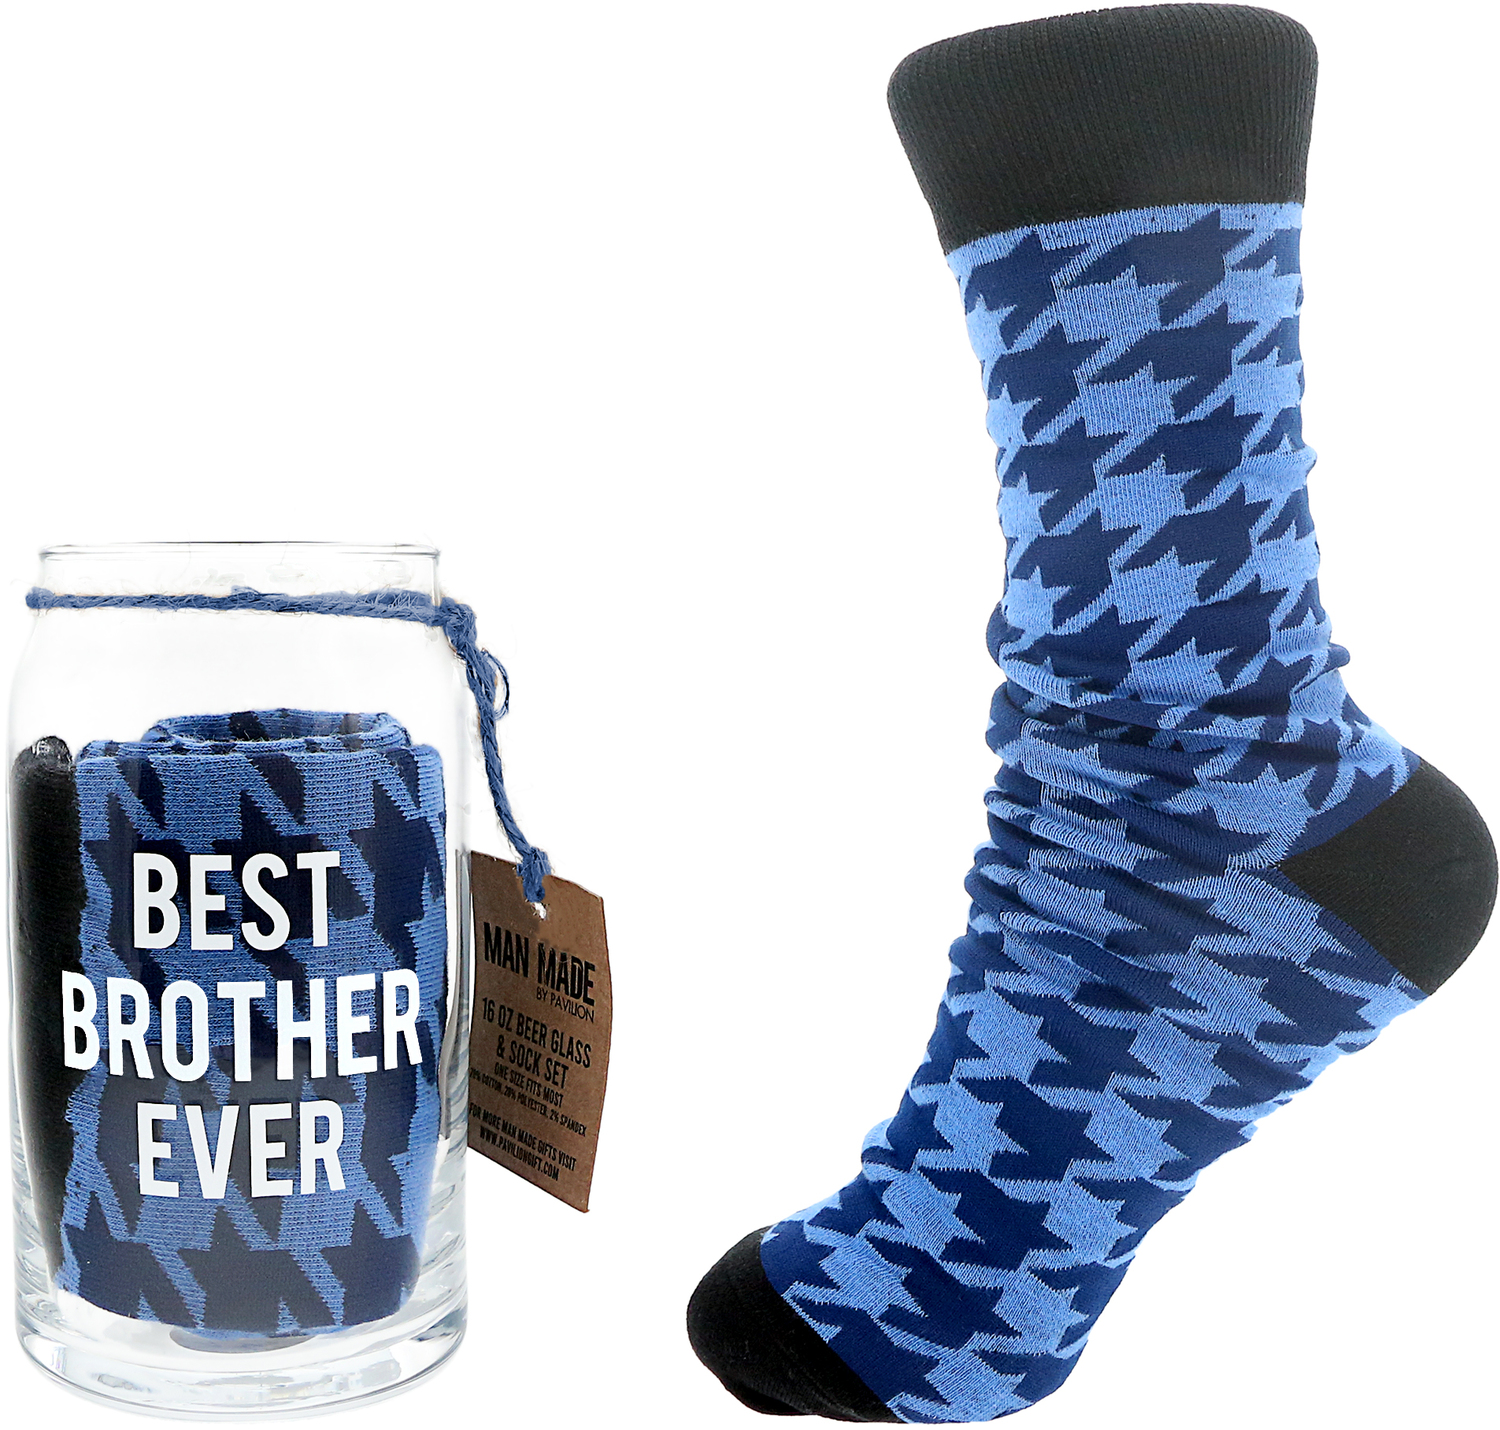 Best Brother by Man Made - Best Brother - 16 oz Beer Can Glass and Sock Set